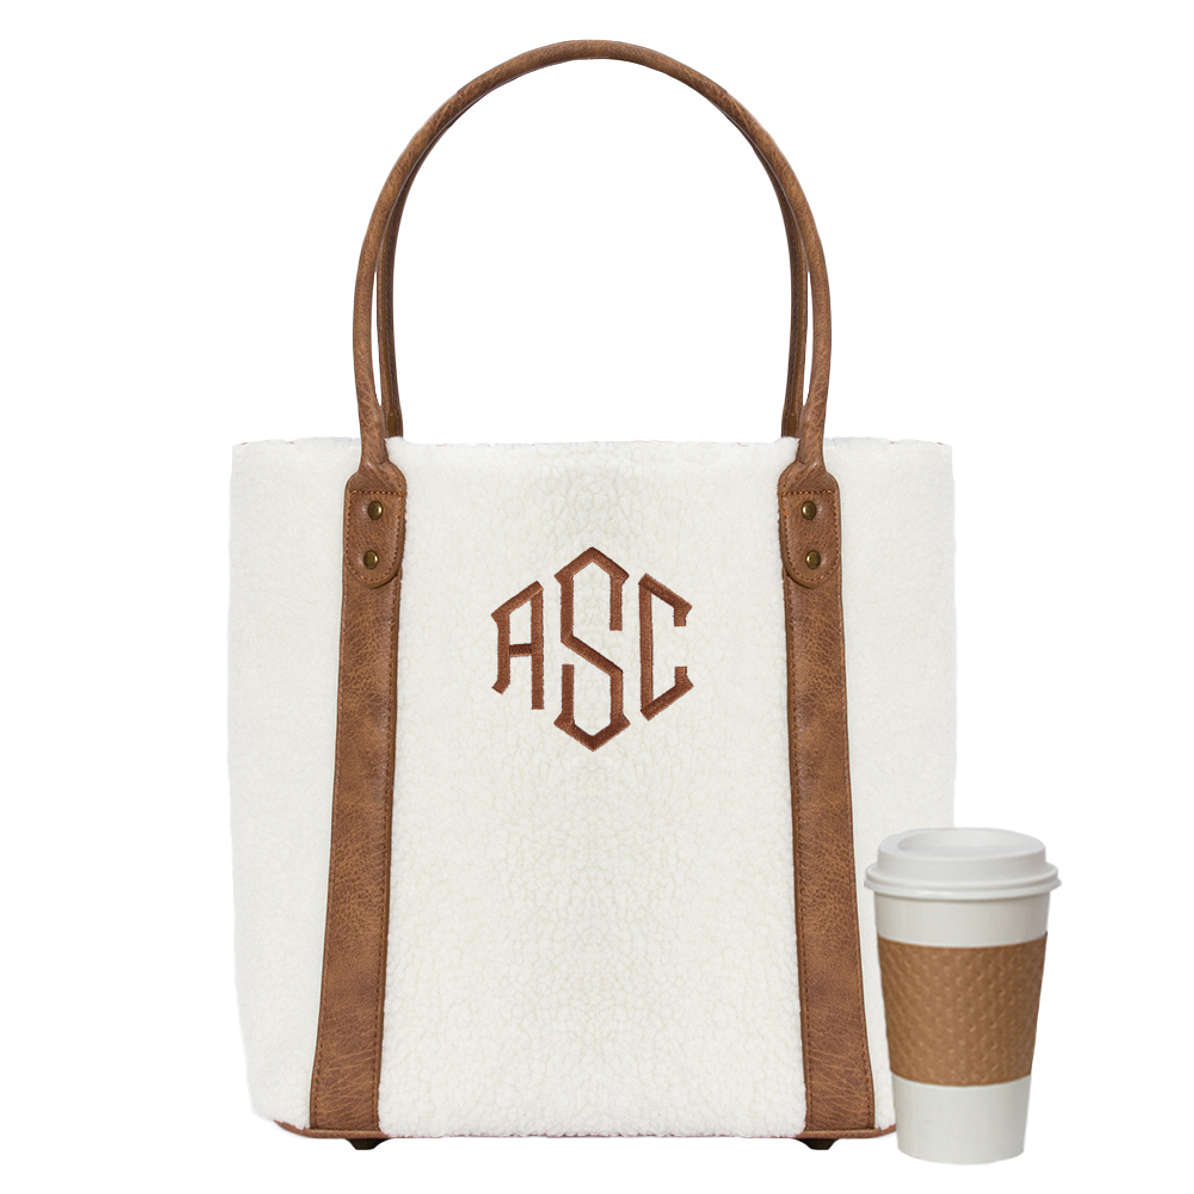 Sherpa Tote Bag in Ivory - Marleylilly